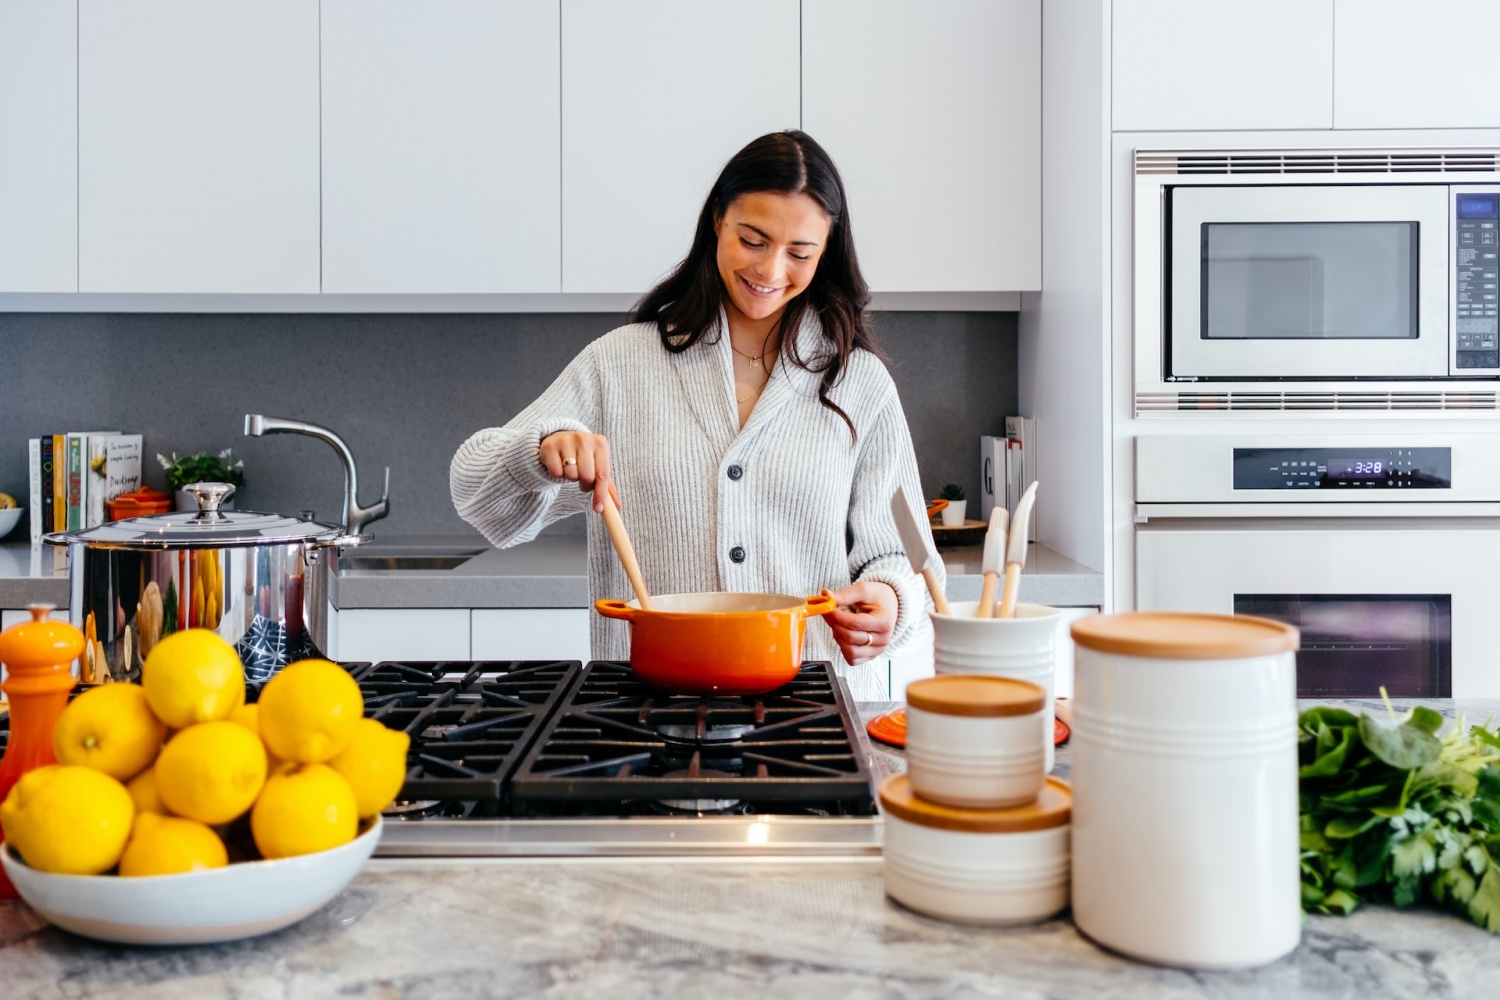 Here's Why Cooking Is Good for Mental Health